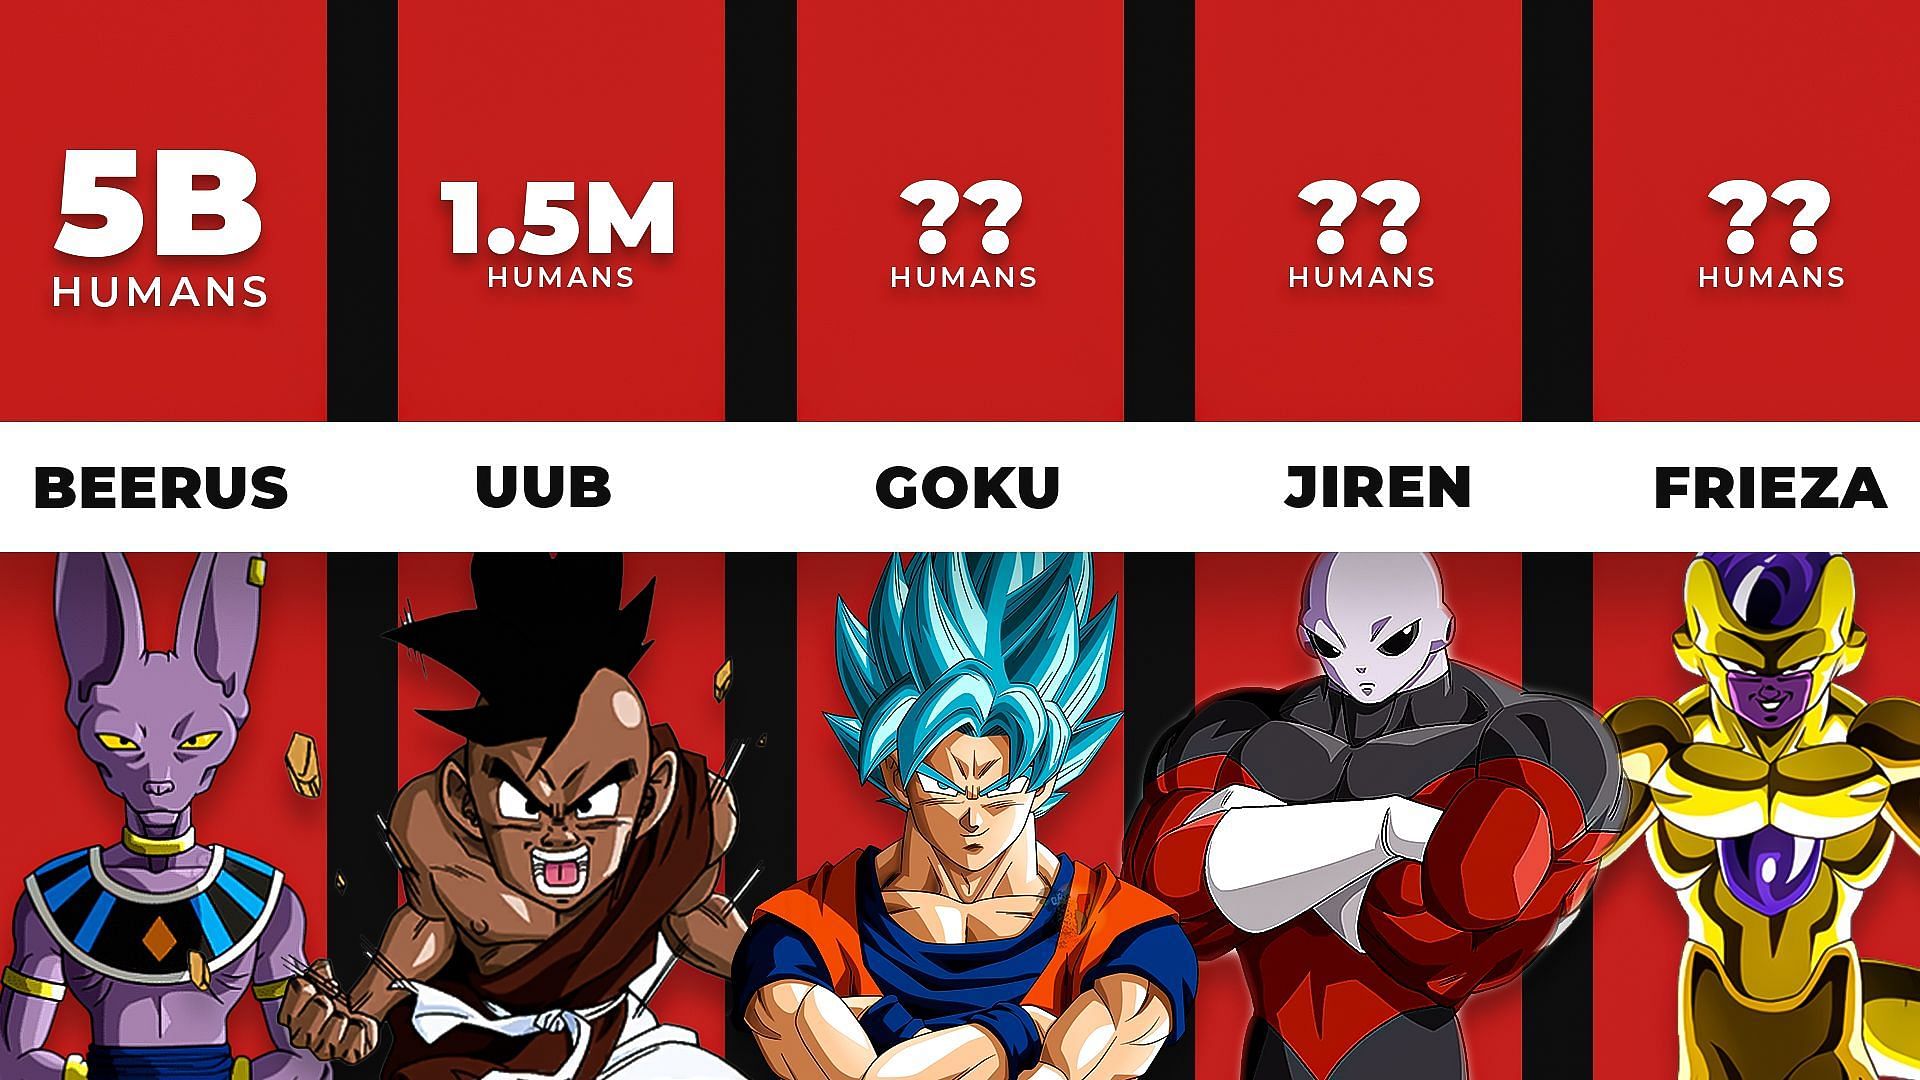 10 Dragon Ball characters ranked based on strength